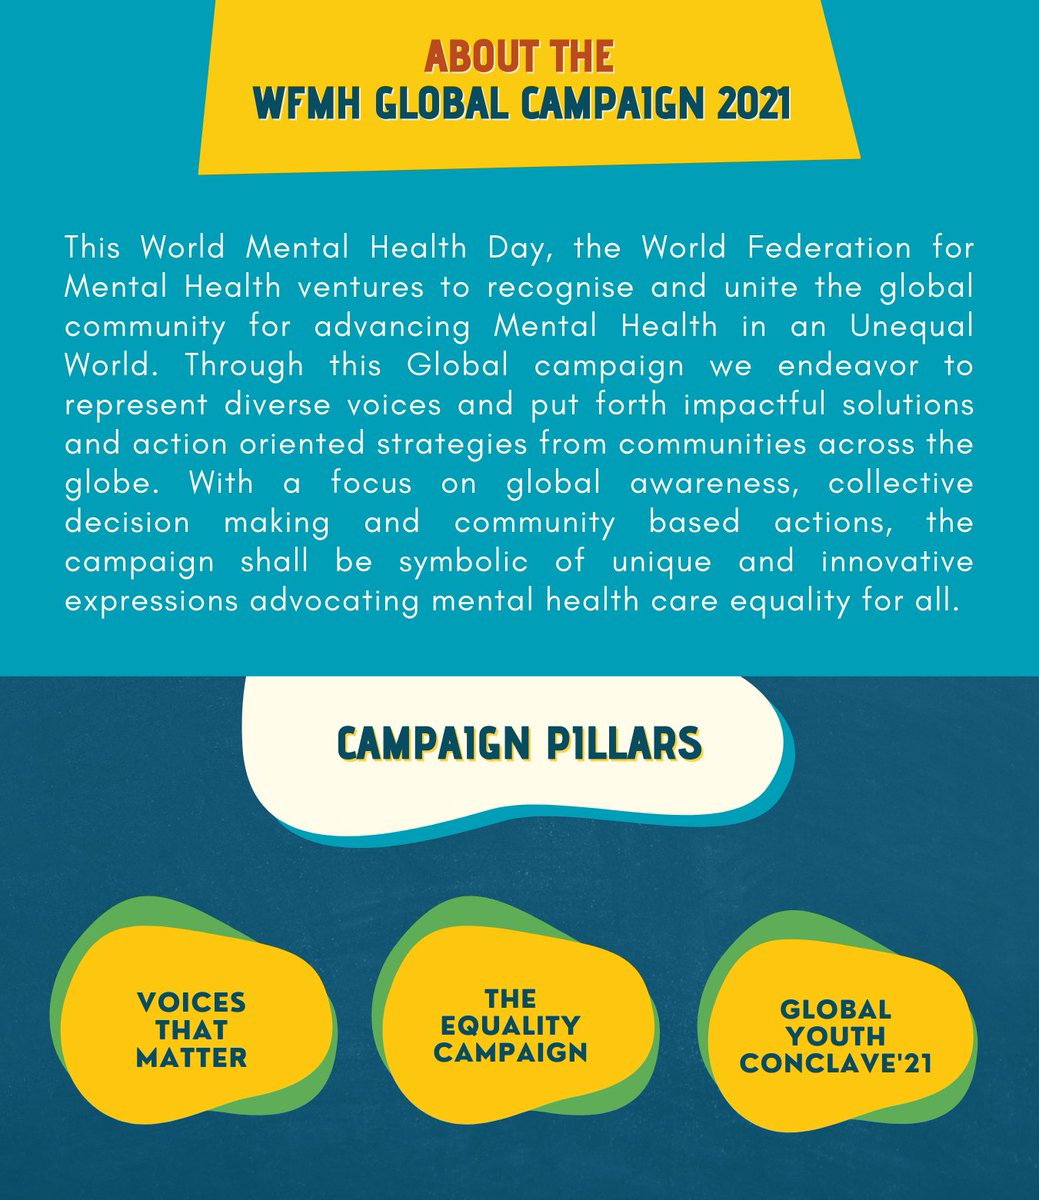 Part 1 We are pleased to present the brochure of the WFMH Global Campaign 2021 - Mental Health in an Unequal World Swipe to explore and participate in the WFMH Global Campaign 2021. Visit wmhd2021.com to know more and join us in this journey of global change! #WMHD2021